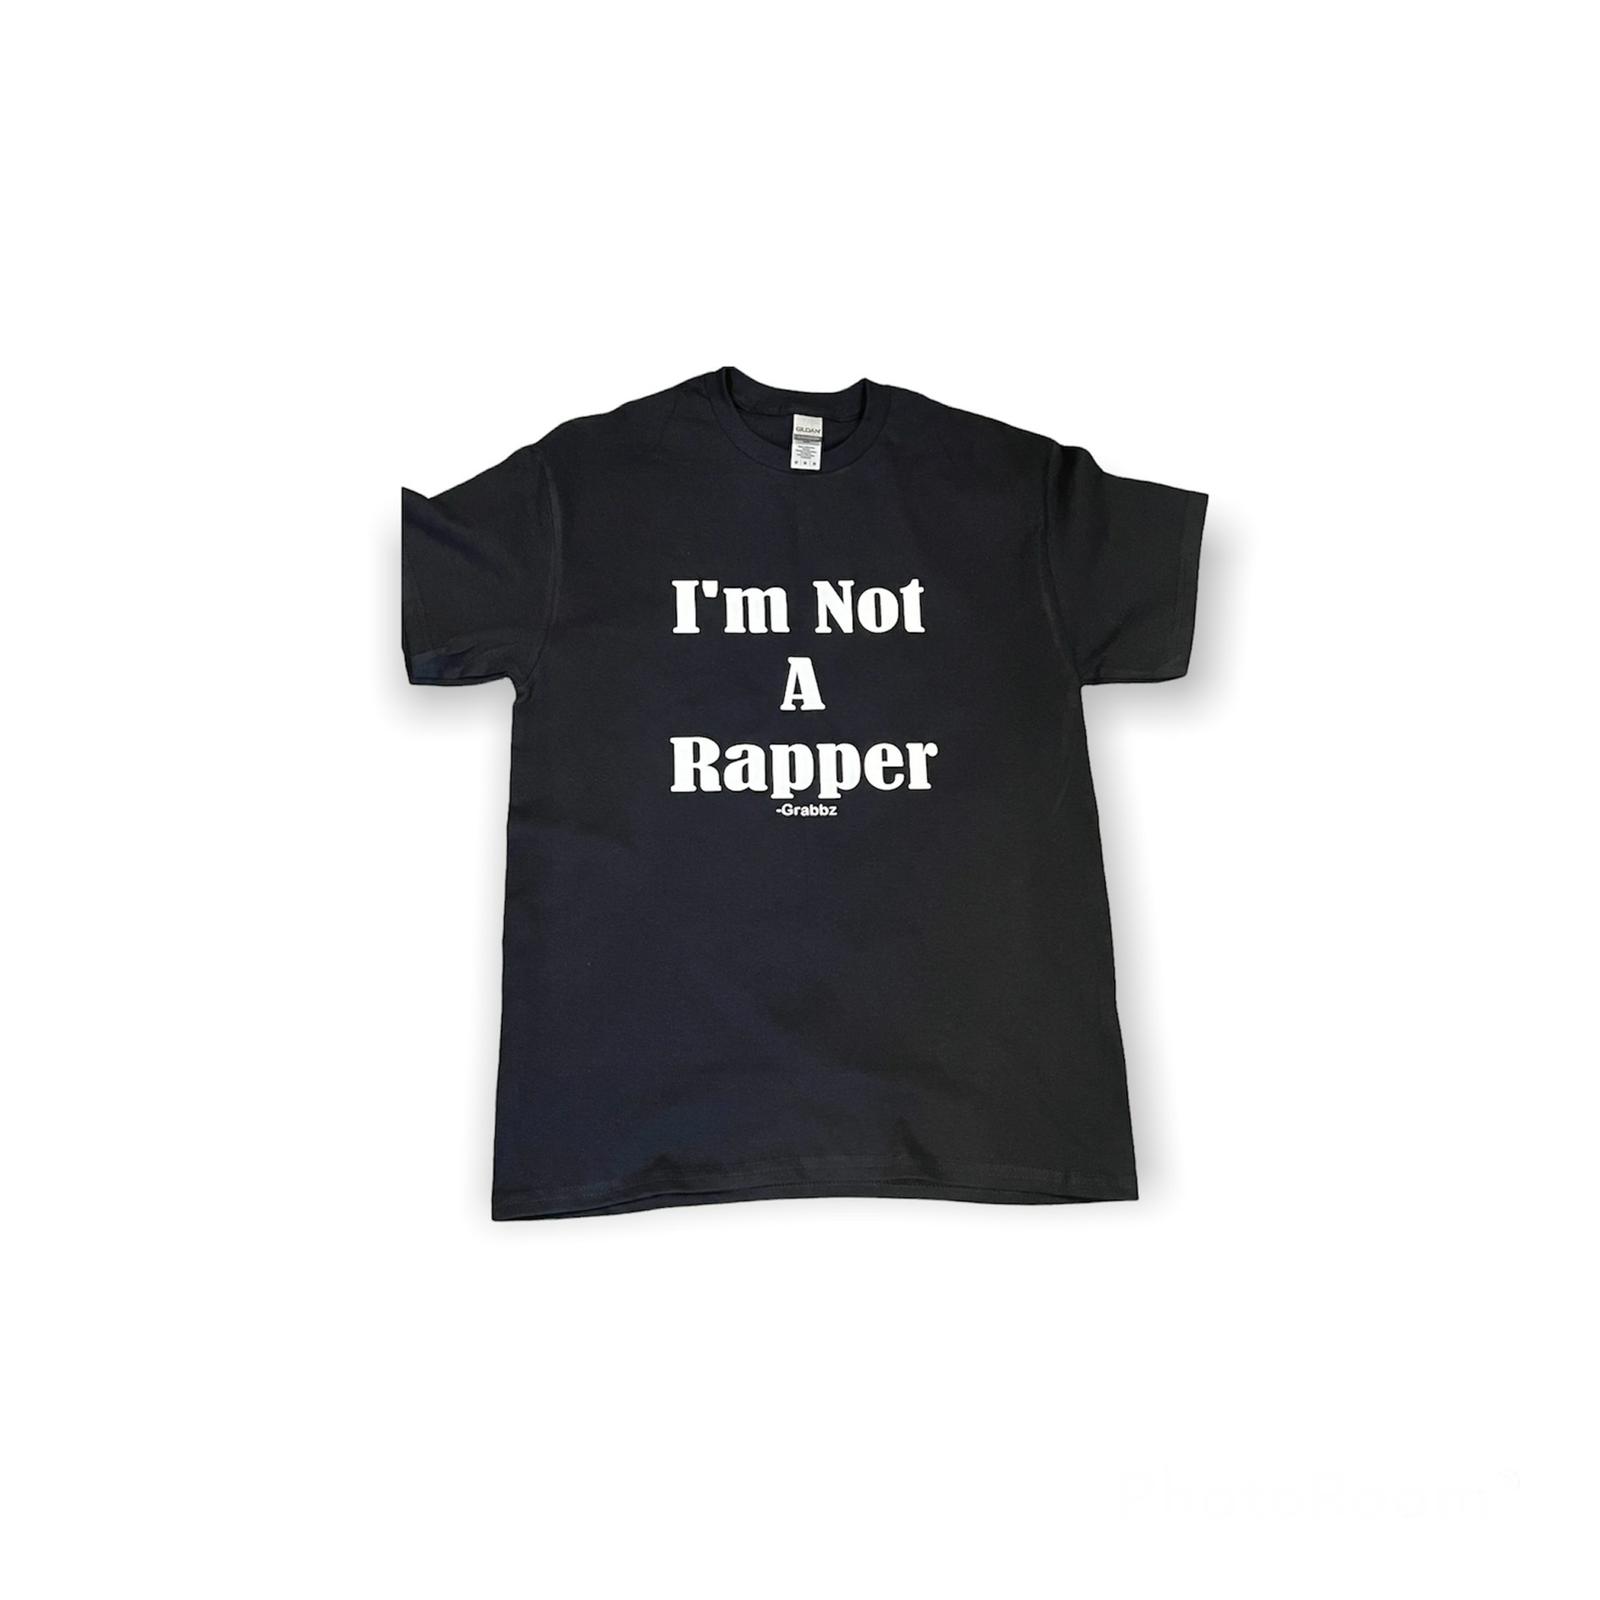 Im Not A Rapper - T-shirts & Hoodies by This is Grabbz